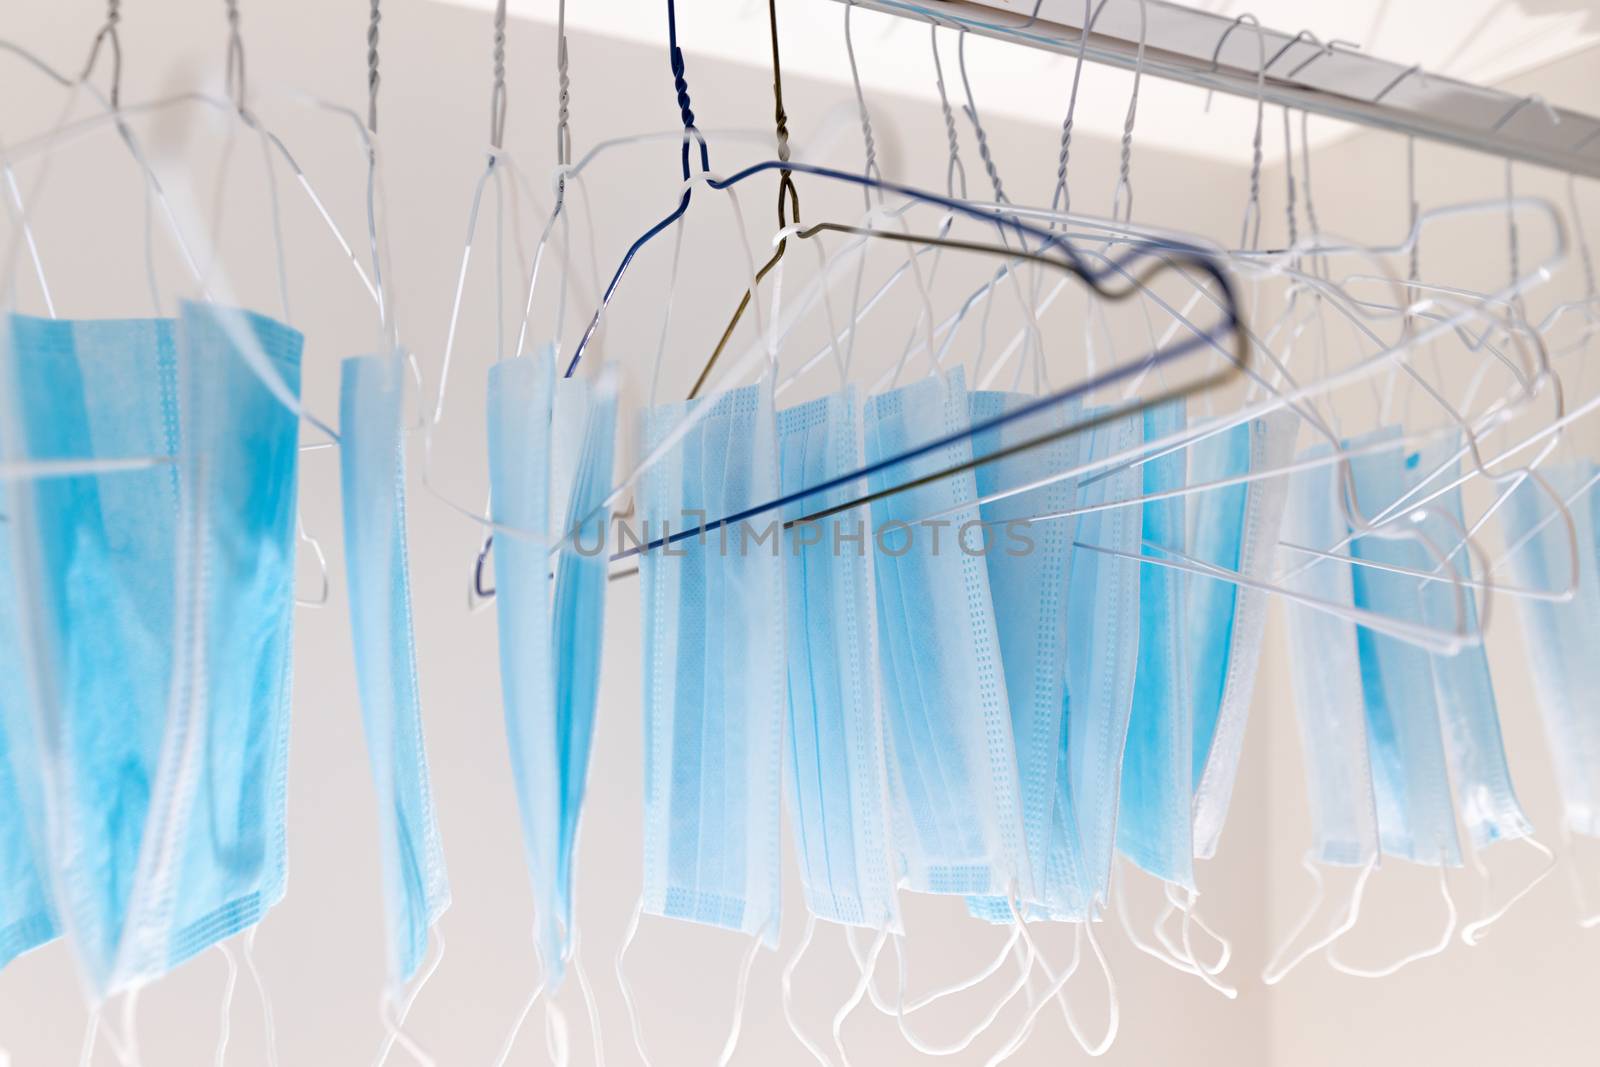 Disposable surgical masks hanging on hangers in a wardrobe closet. Concept of new normal. Concept of waring a mask becoming e new habit. Concept of adaptation during crisis and pandemic due to Covid. by dugulan